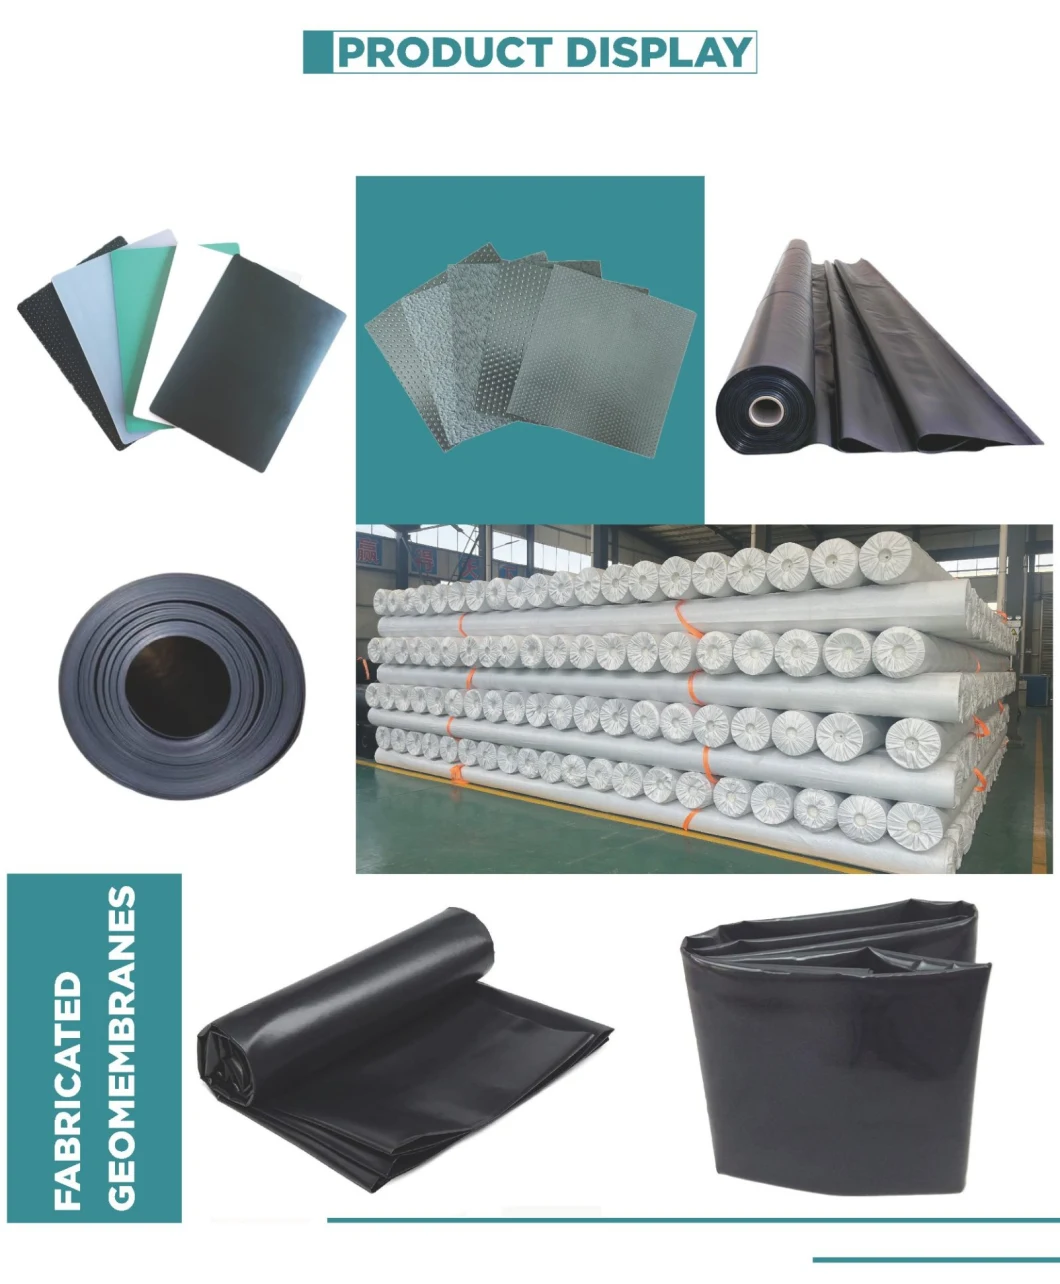 HDPE LDPE LLDPE 0.5mm 0.75mm 1.0mm 1.5mm 2.0mm 3.0mm ISO Certification Smooth Surface Black GM13 HDPE Geomembrane for Landfill Dam Fish Shrimp Dam Pond Liner